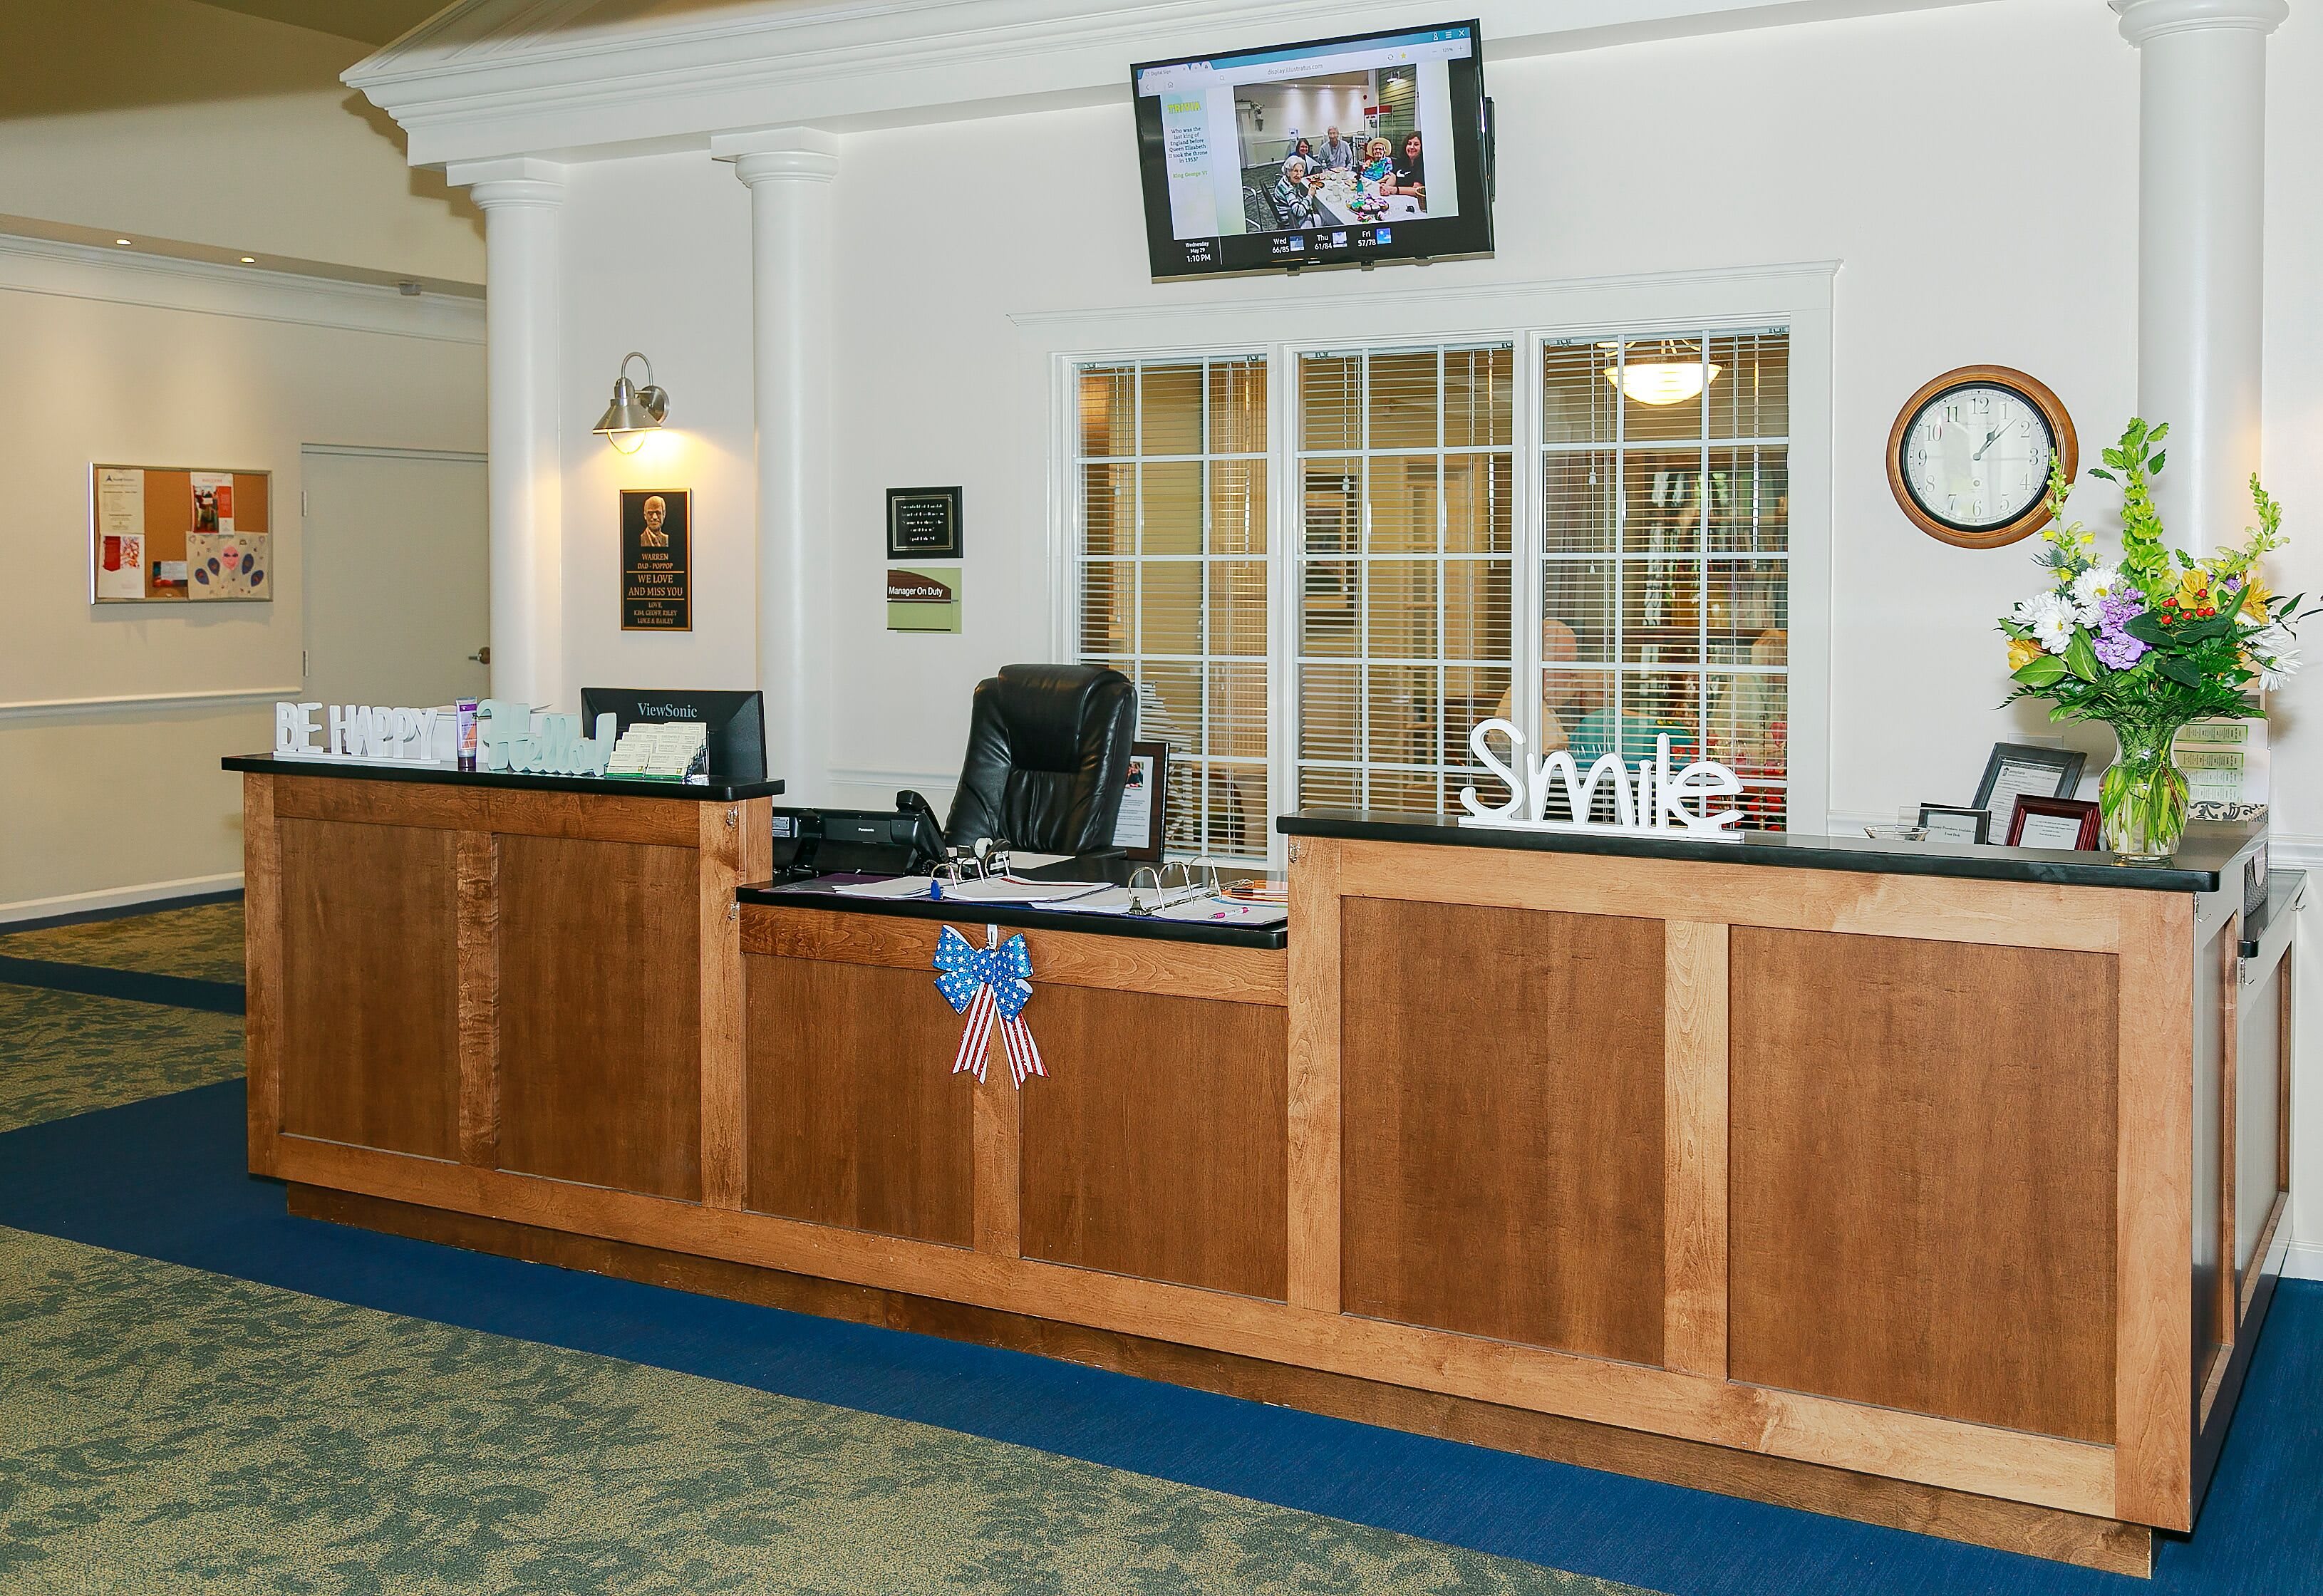 Traditions of Lansdale reception area